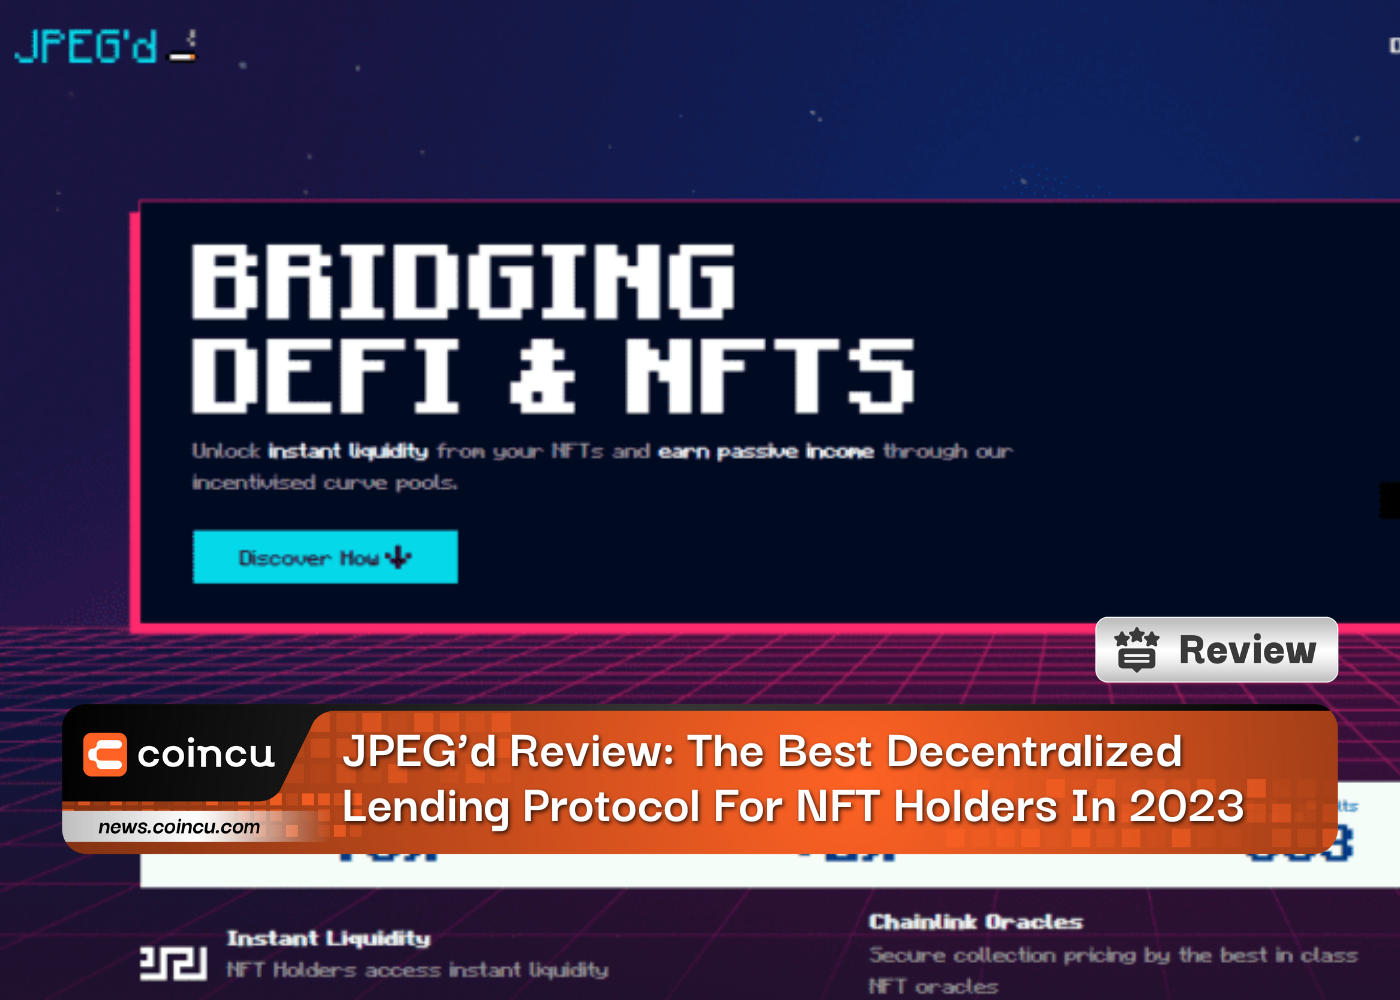 JPEGd Review: The Best Decentralized Lending Protocol For NFT Holders In 2023